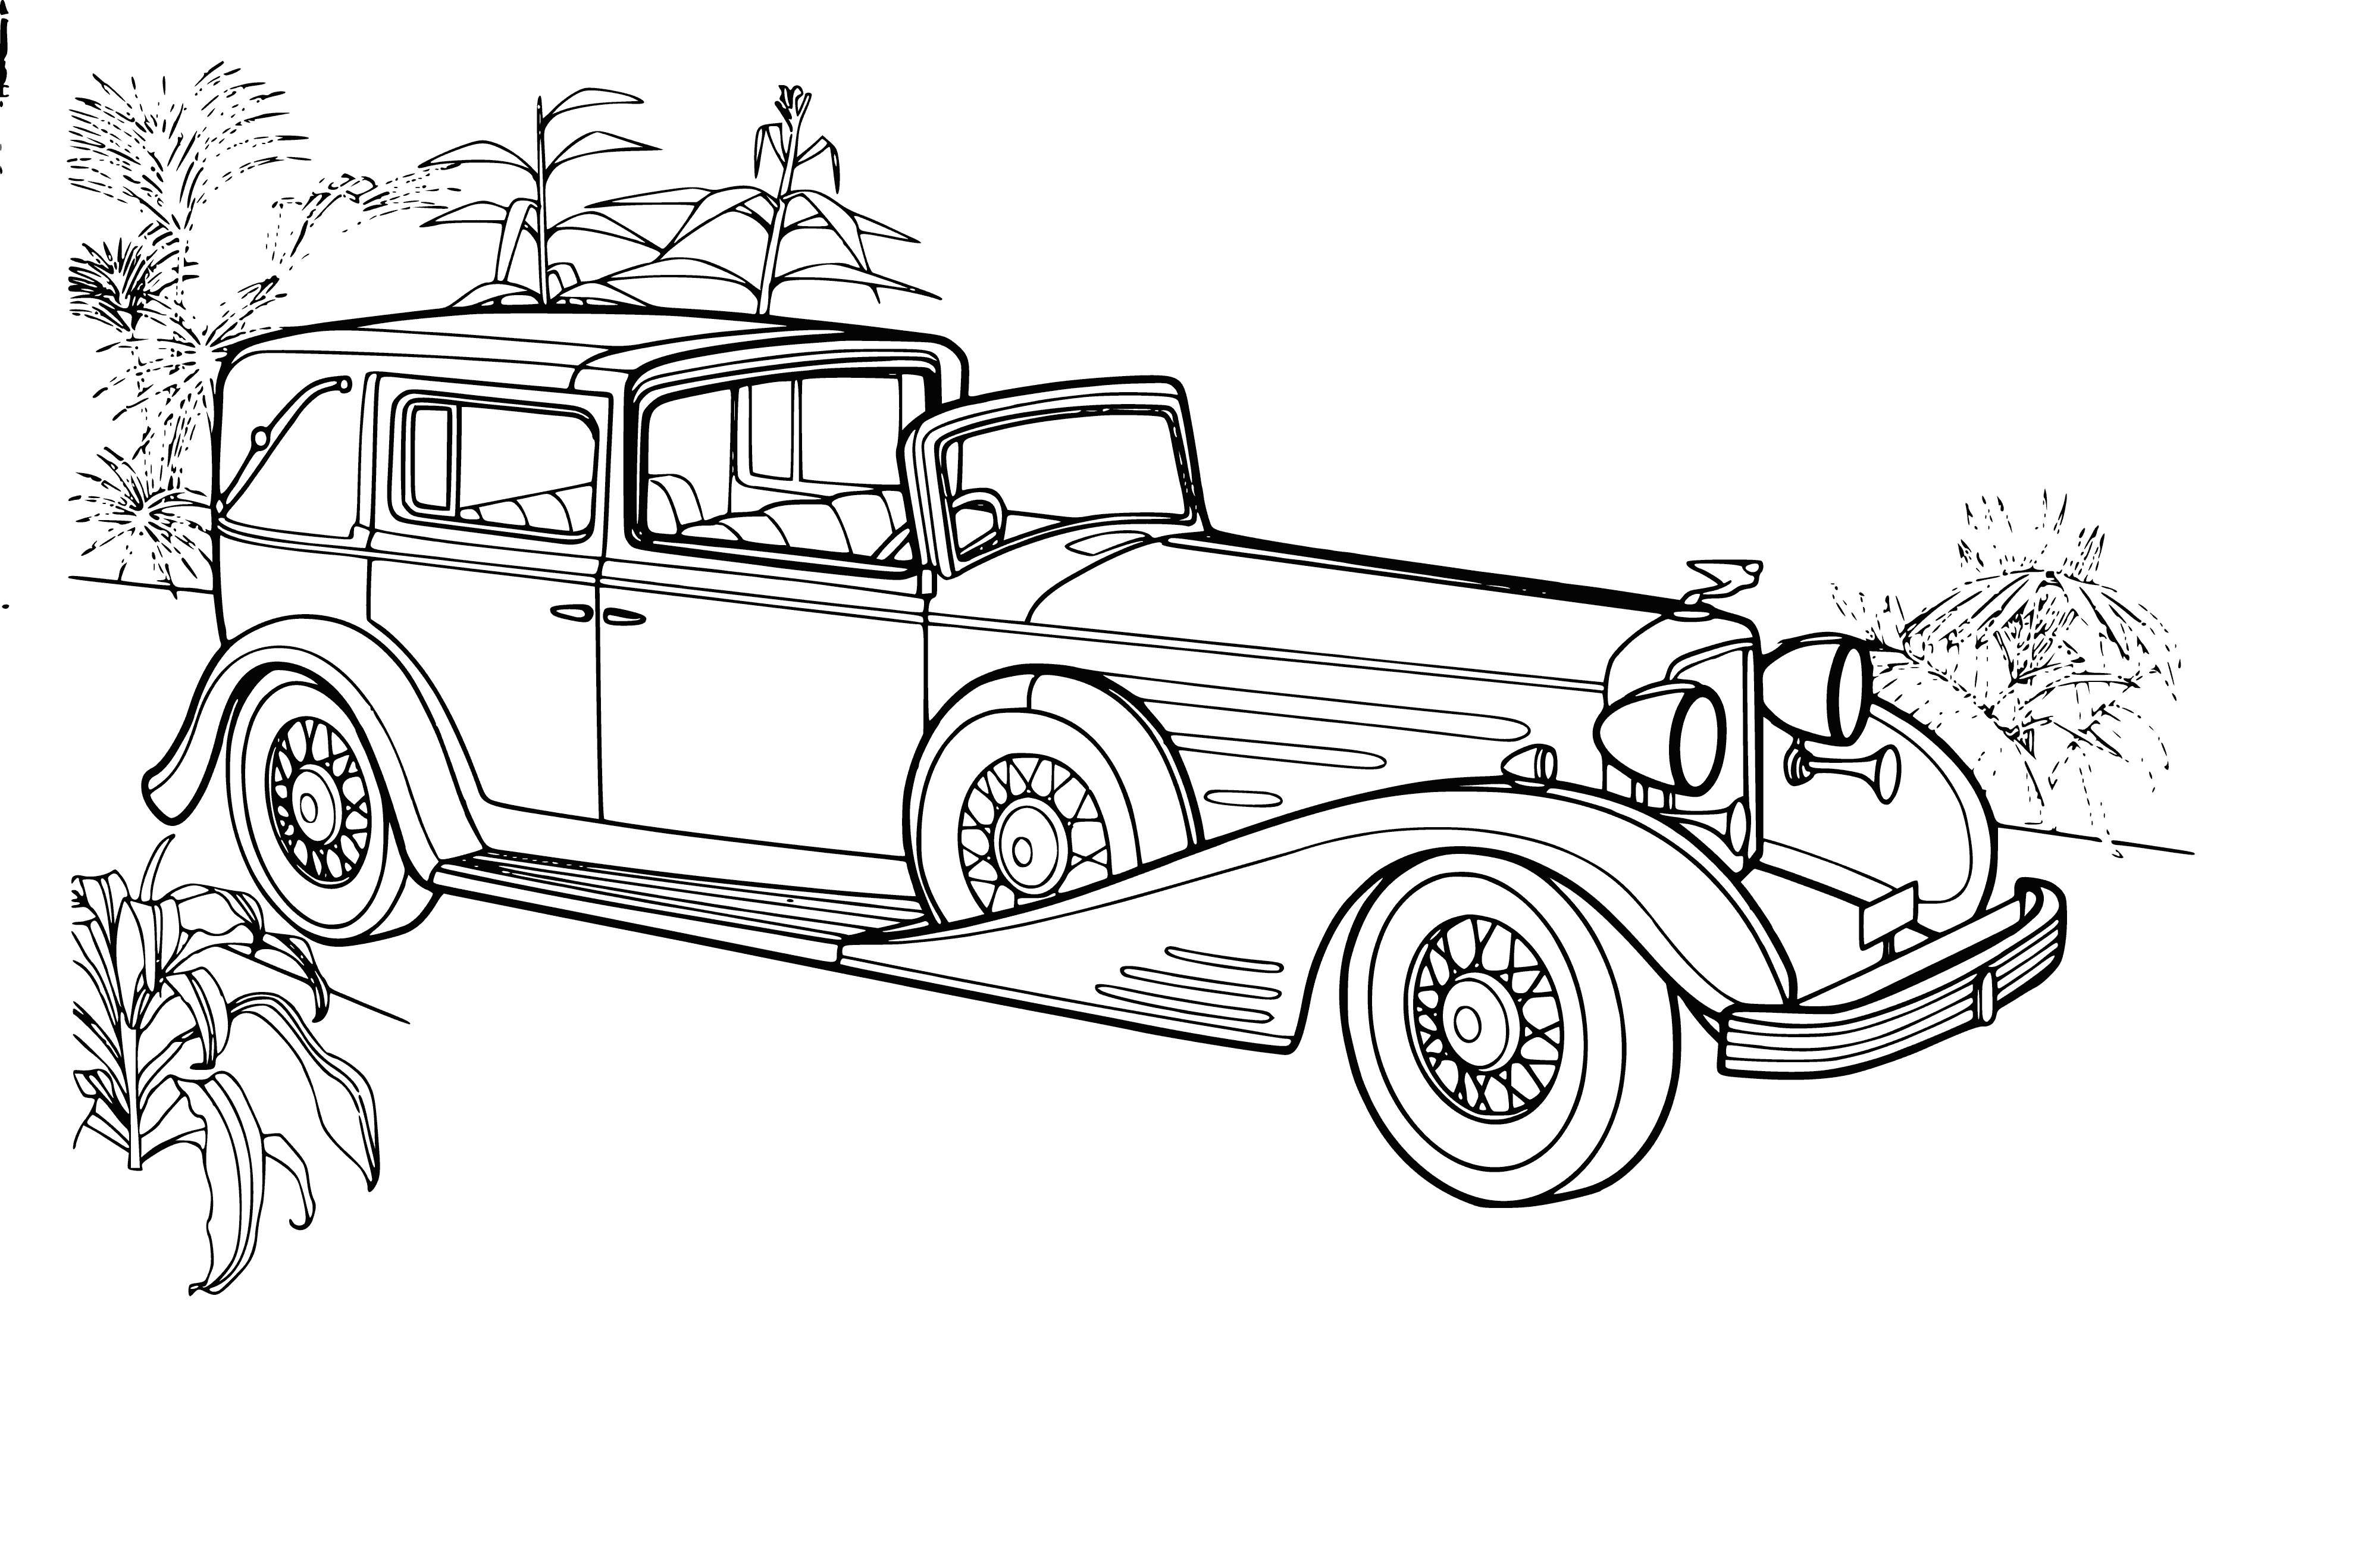 coloring page: Vintage Cadillac Town Car: Sleek, shining, long curved body w/large grille and headlamps, smooth hood, two doors — perfect for luxury and style.